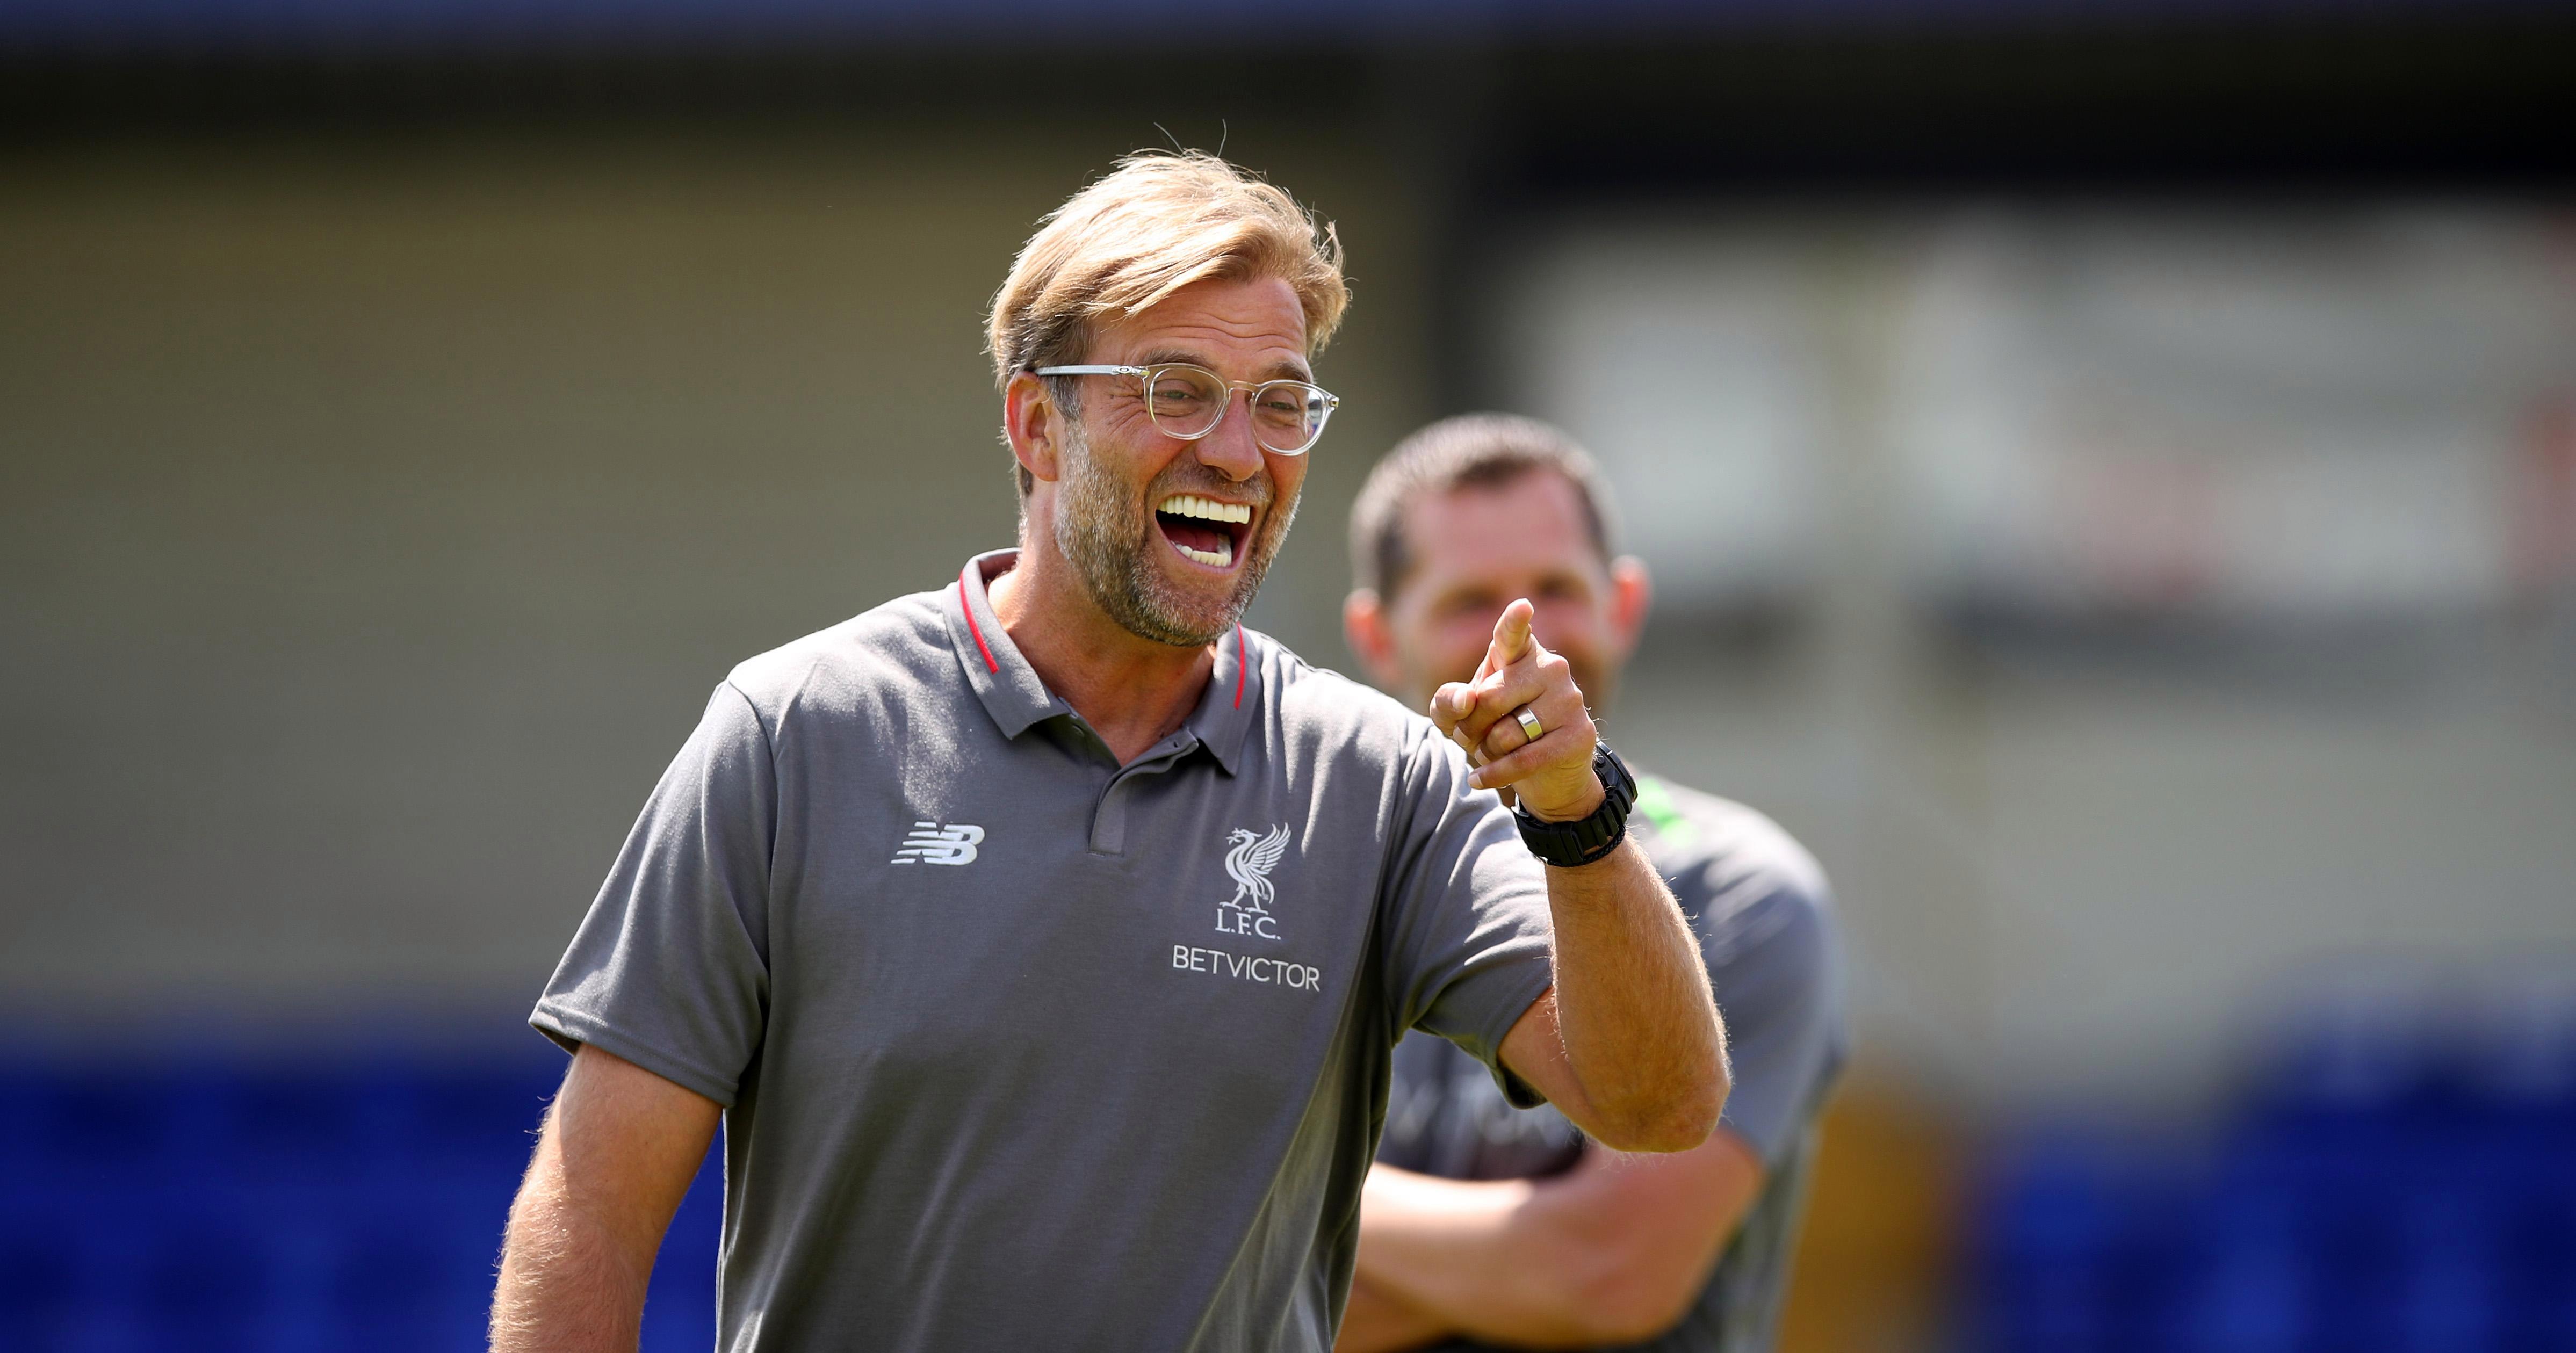 Liverpool News: 'He can say whatever he wants' - Jurgen Klopp not bothered by Jose Mourinho taunts